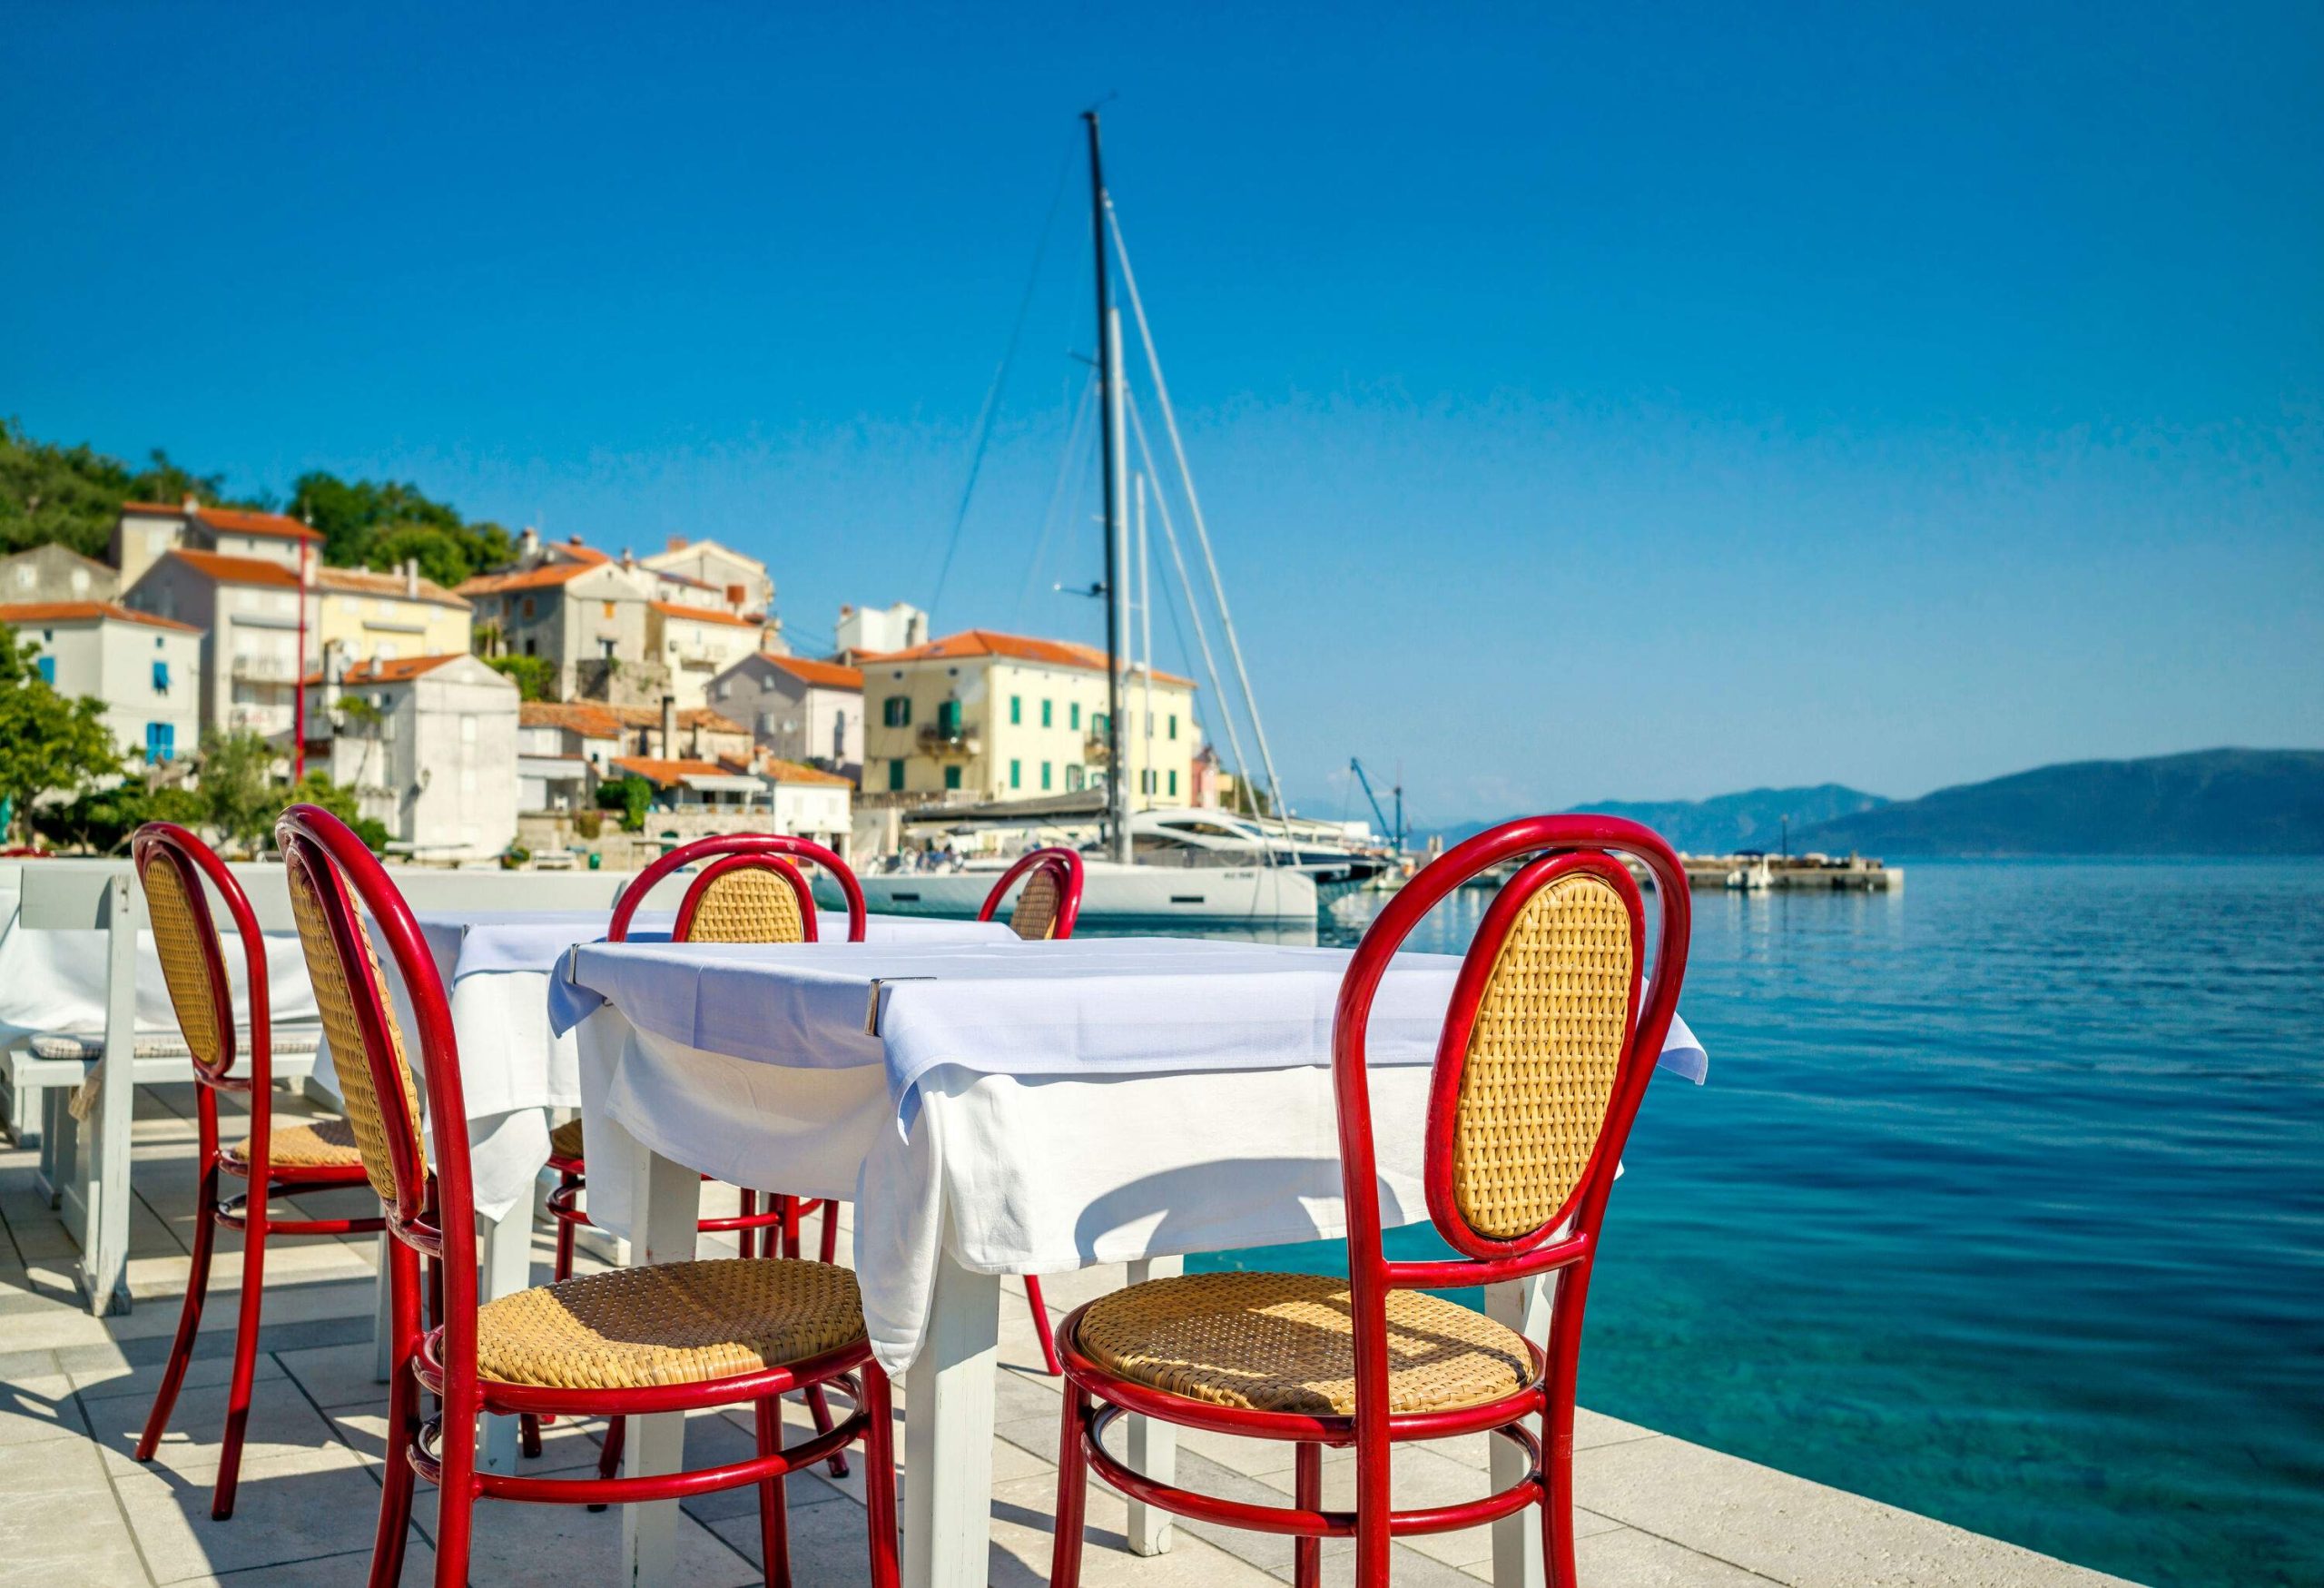 Tables and chairs are ready for outdoor dining alongside the harbour with a view of houses layered on the hill.